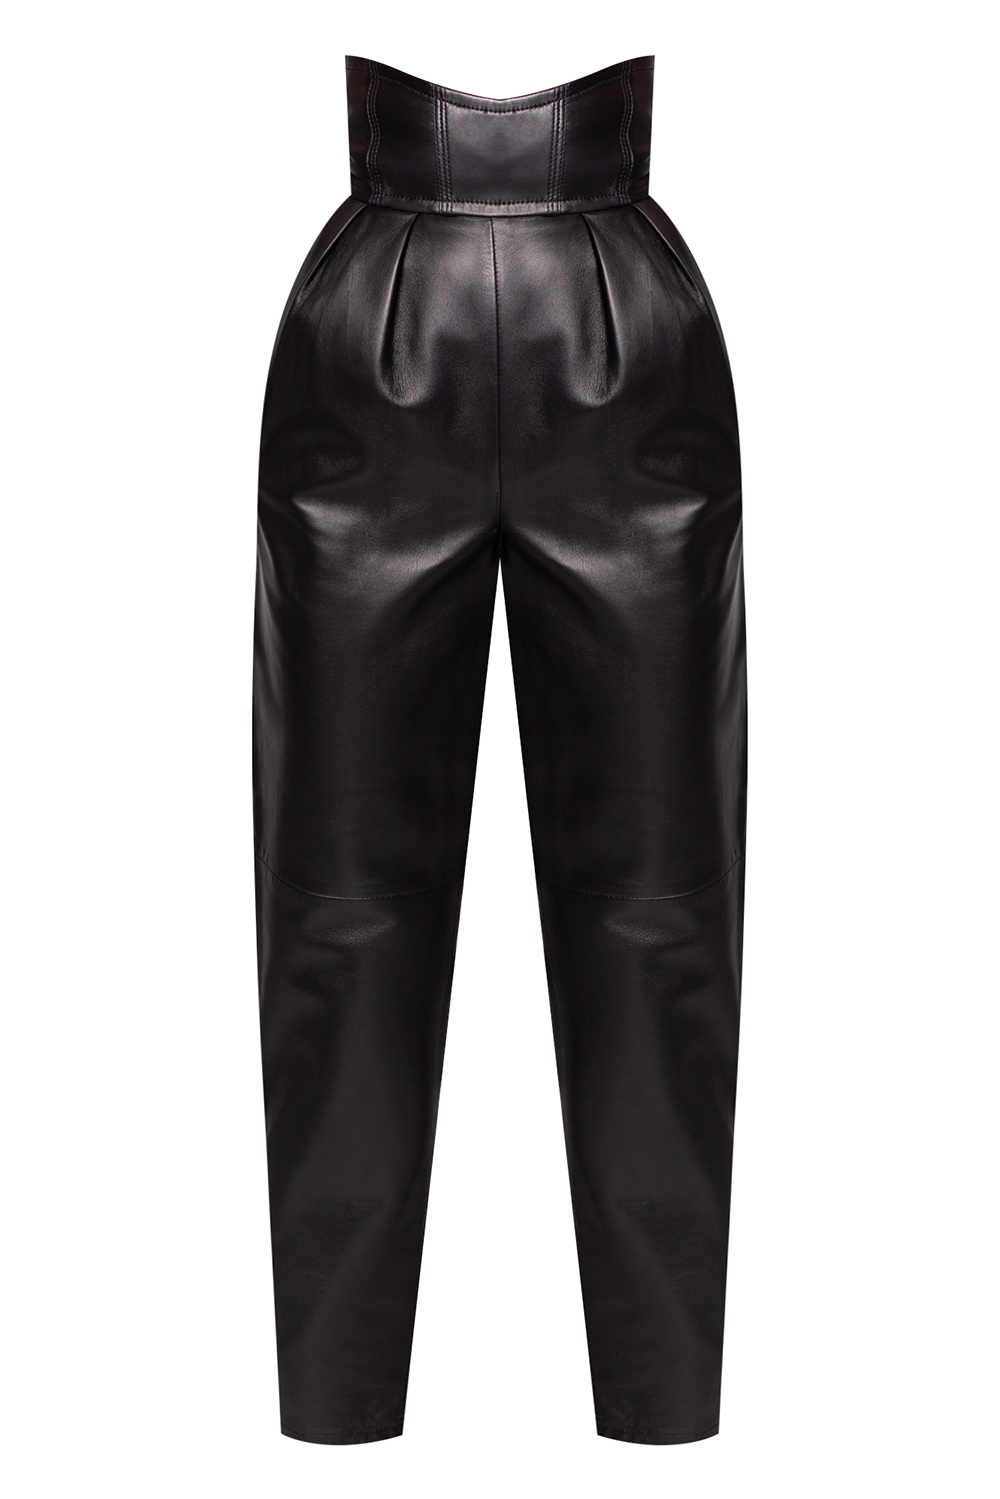 The latest high waisted leather trousers in polyester for women   FASHIOLAin